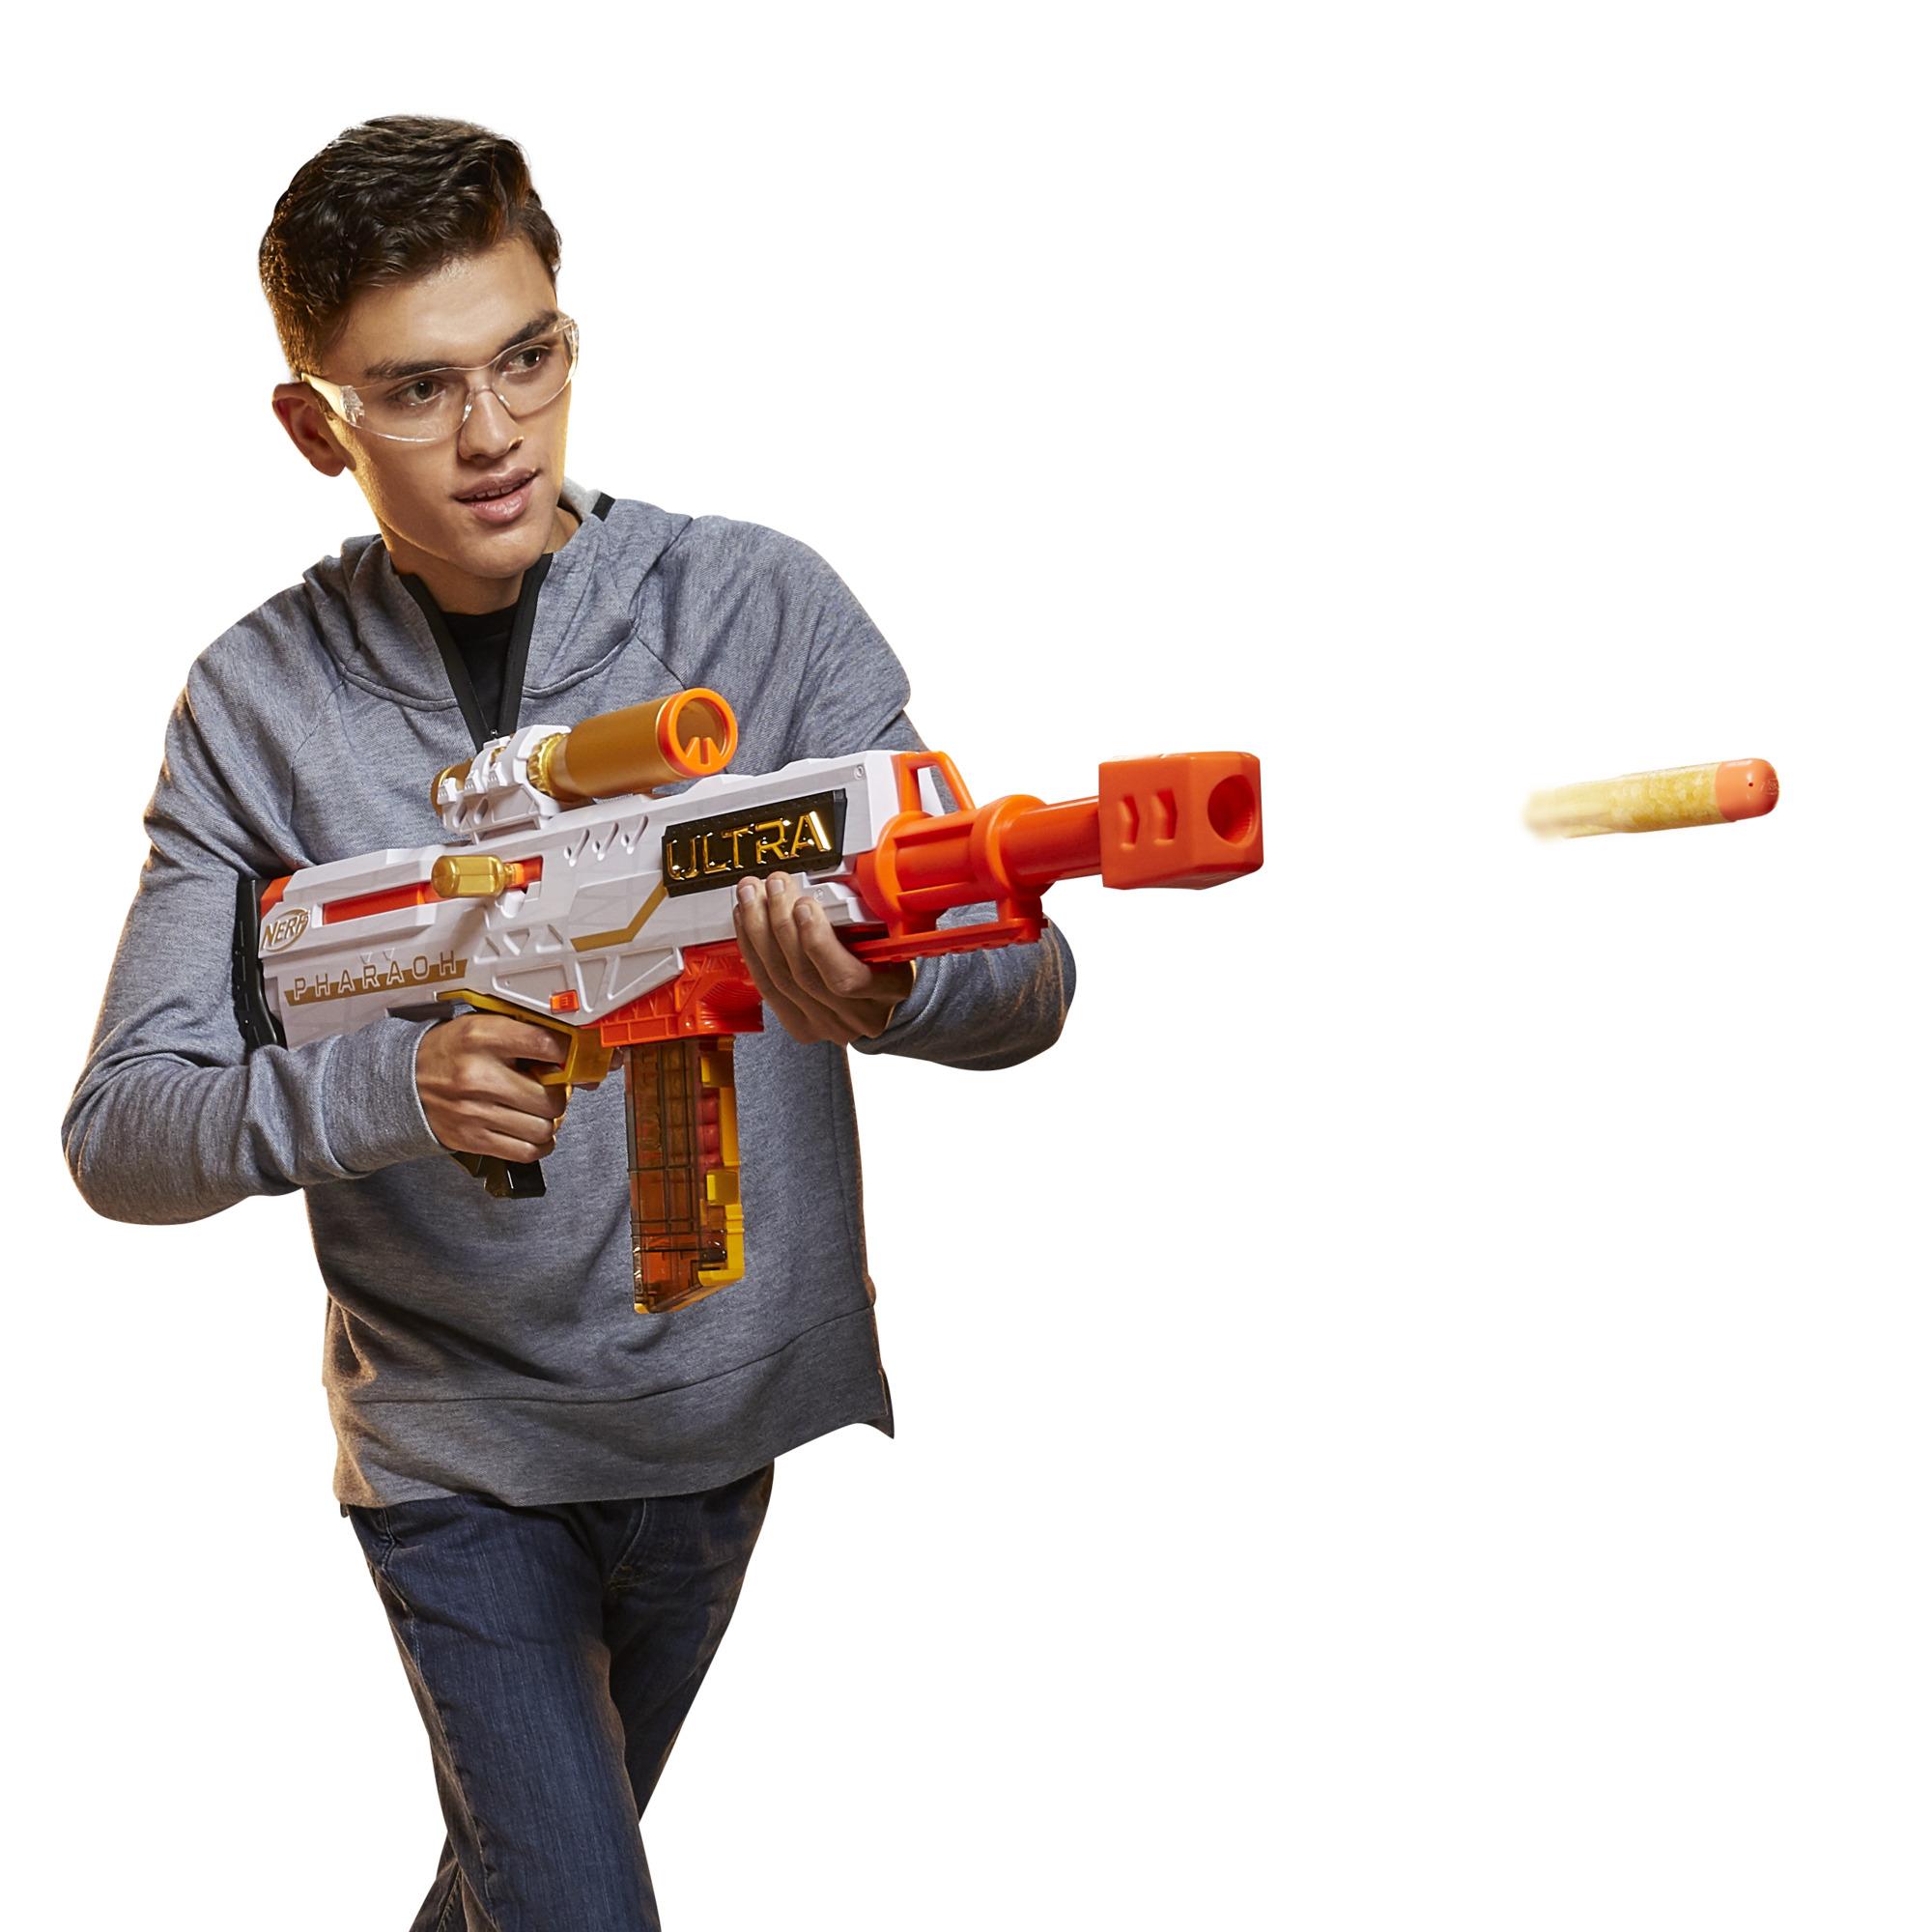 Nerf Ultra Pharaoh Blaster -- Gold Accents, 10-Dart Clip, 10 Nerf Ultra Darts, Compatible Only with Nerf Ultra Darts